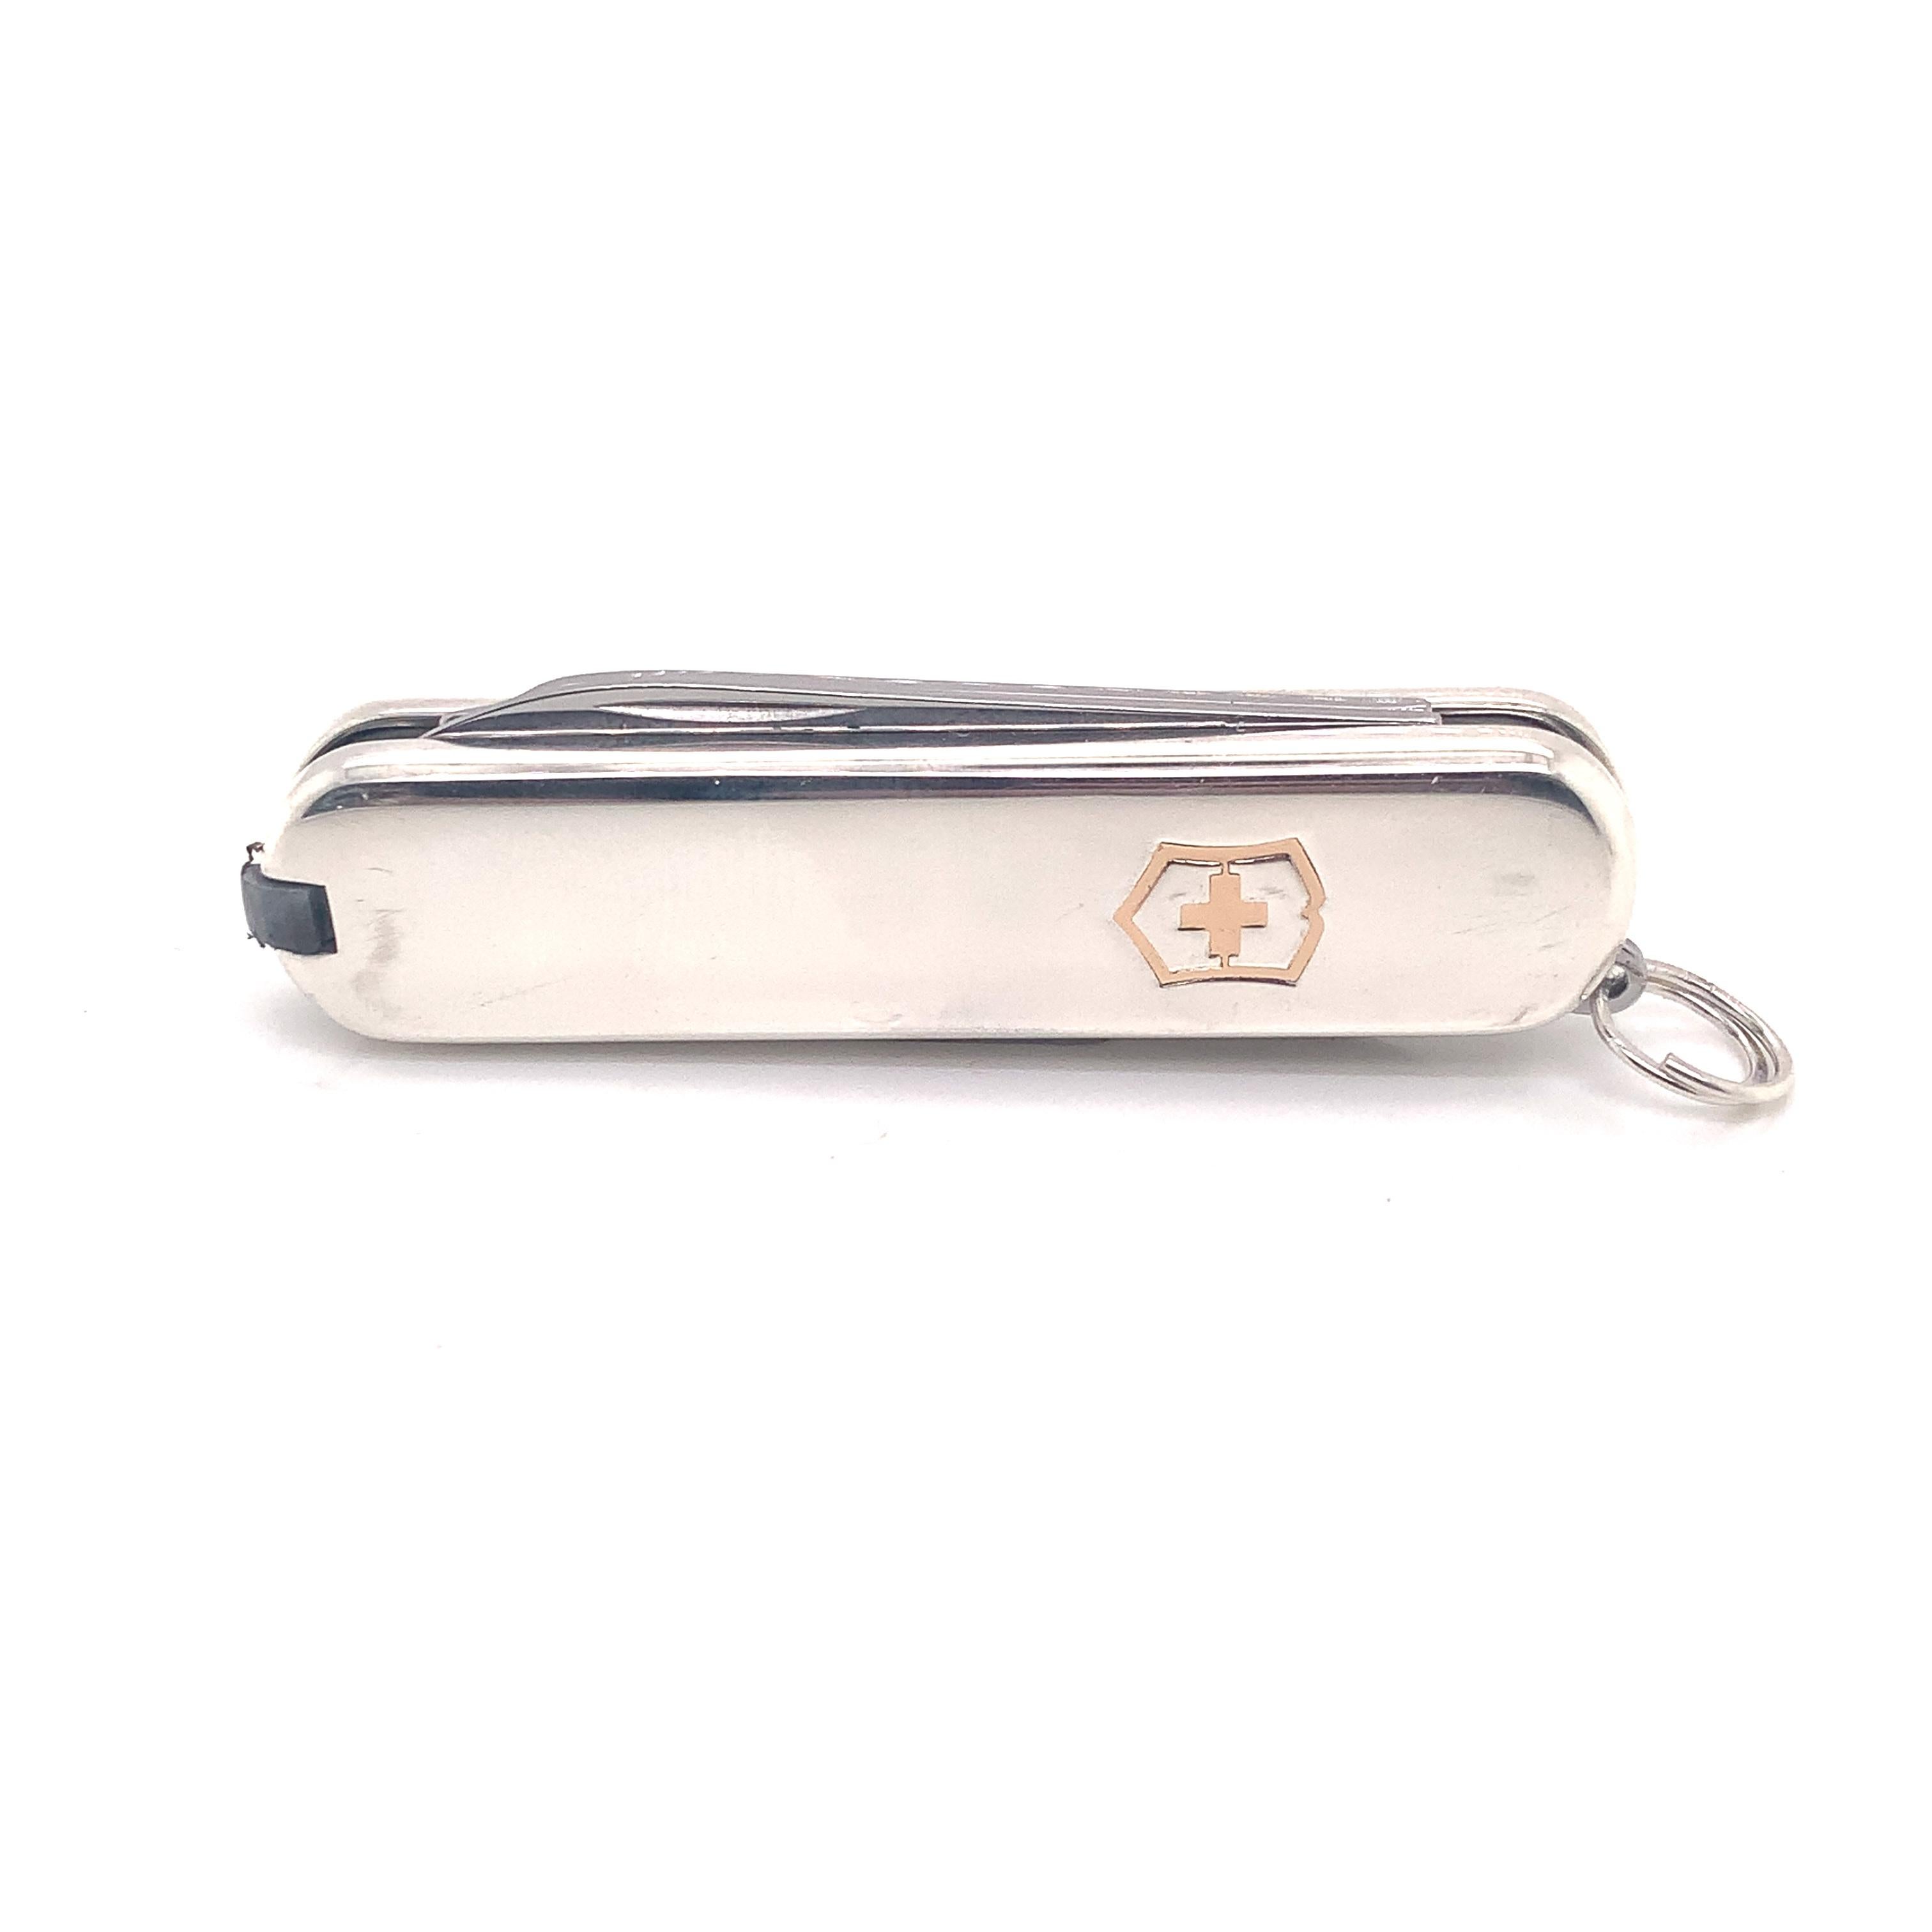 Tiffany & Co Victorinox Swiss Army Pocket Knife Silver 18k Gold 43.9 Grams TIF60

This elegant Authentic Tiffany & Co pocket knife is made of sterling silver & 18k yellow gold and has a weight of 43.9 Grams.

TRUSTED SELLER SINCE 2002

PLEASE SEE